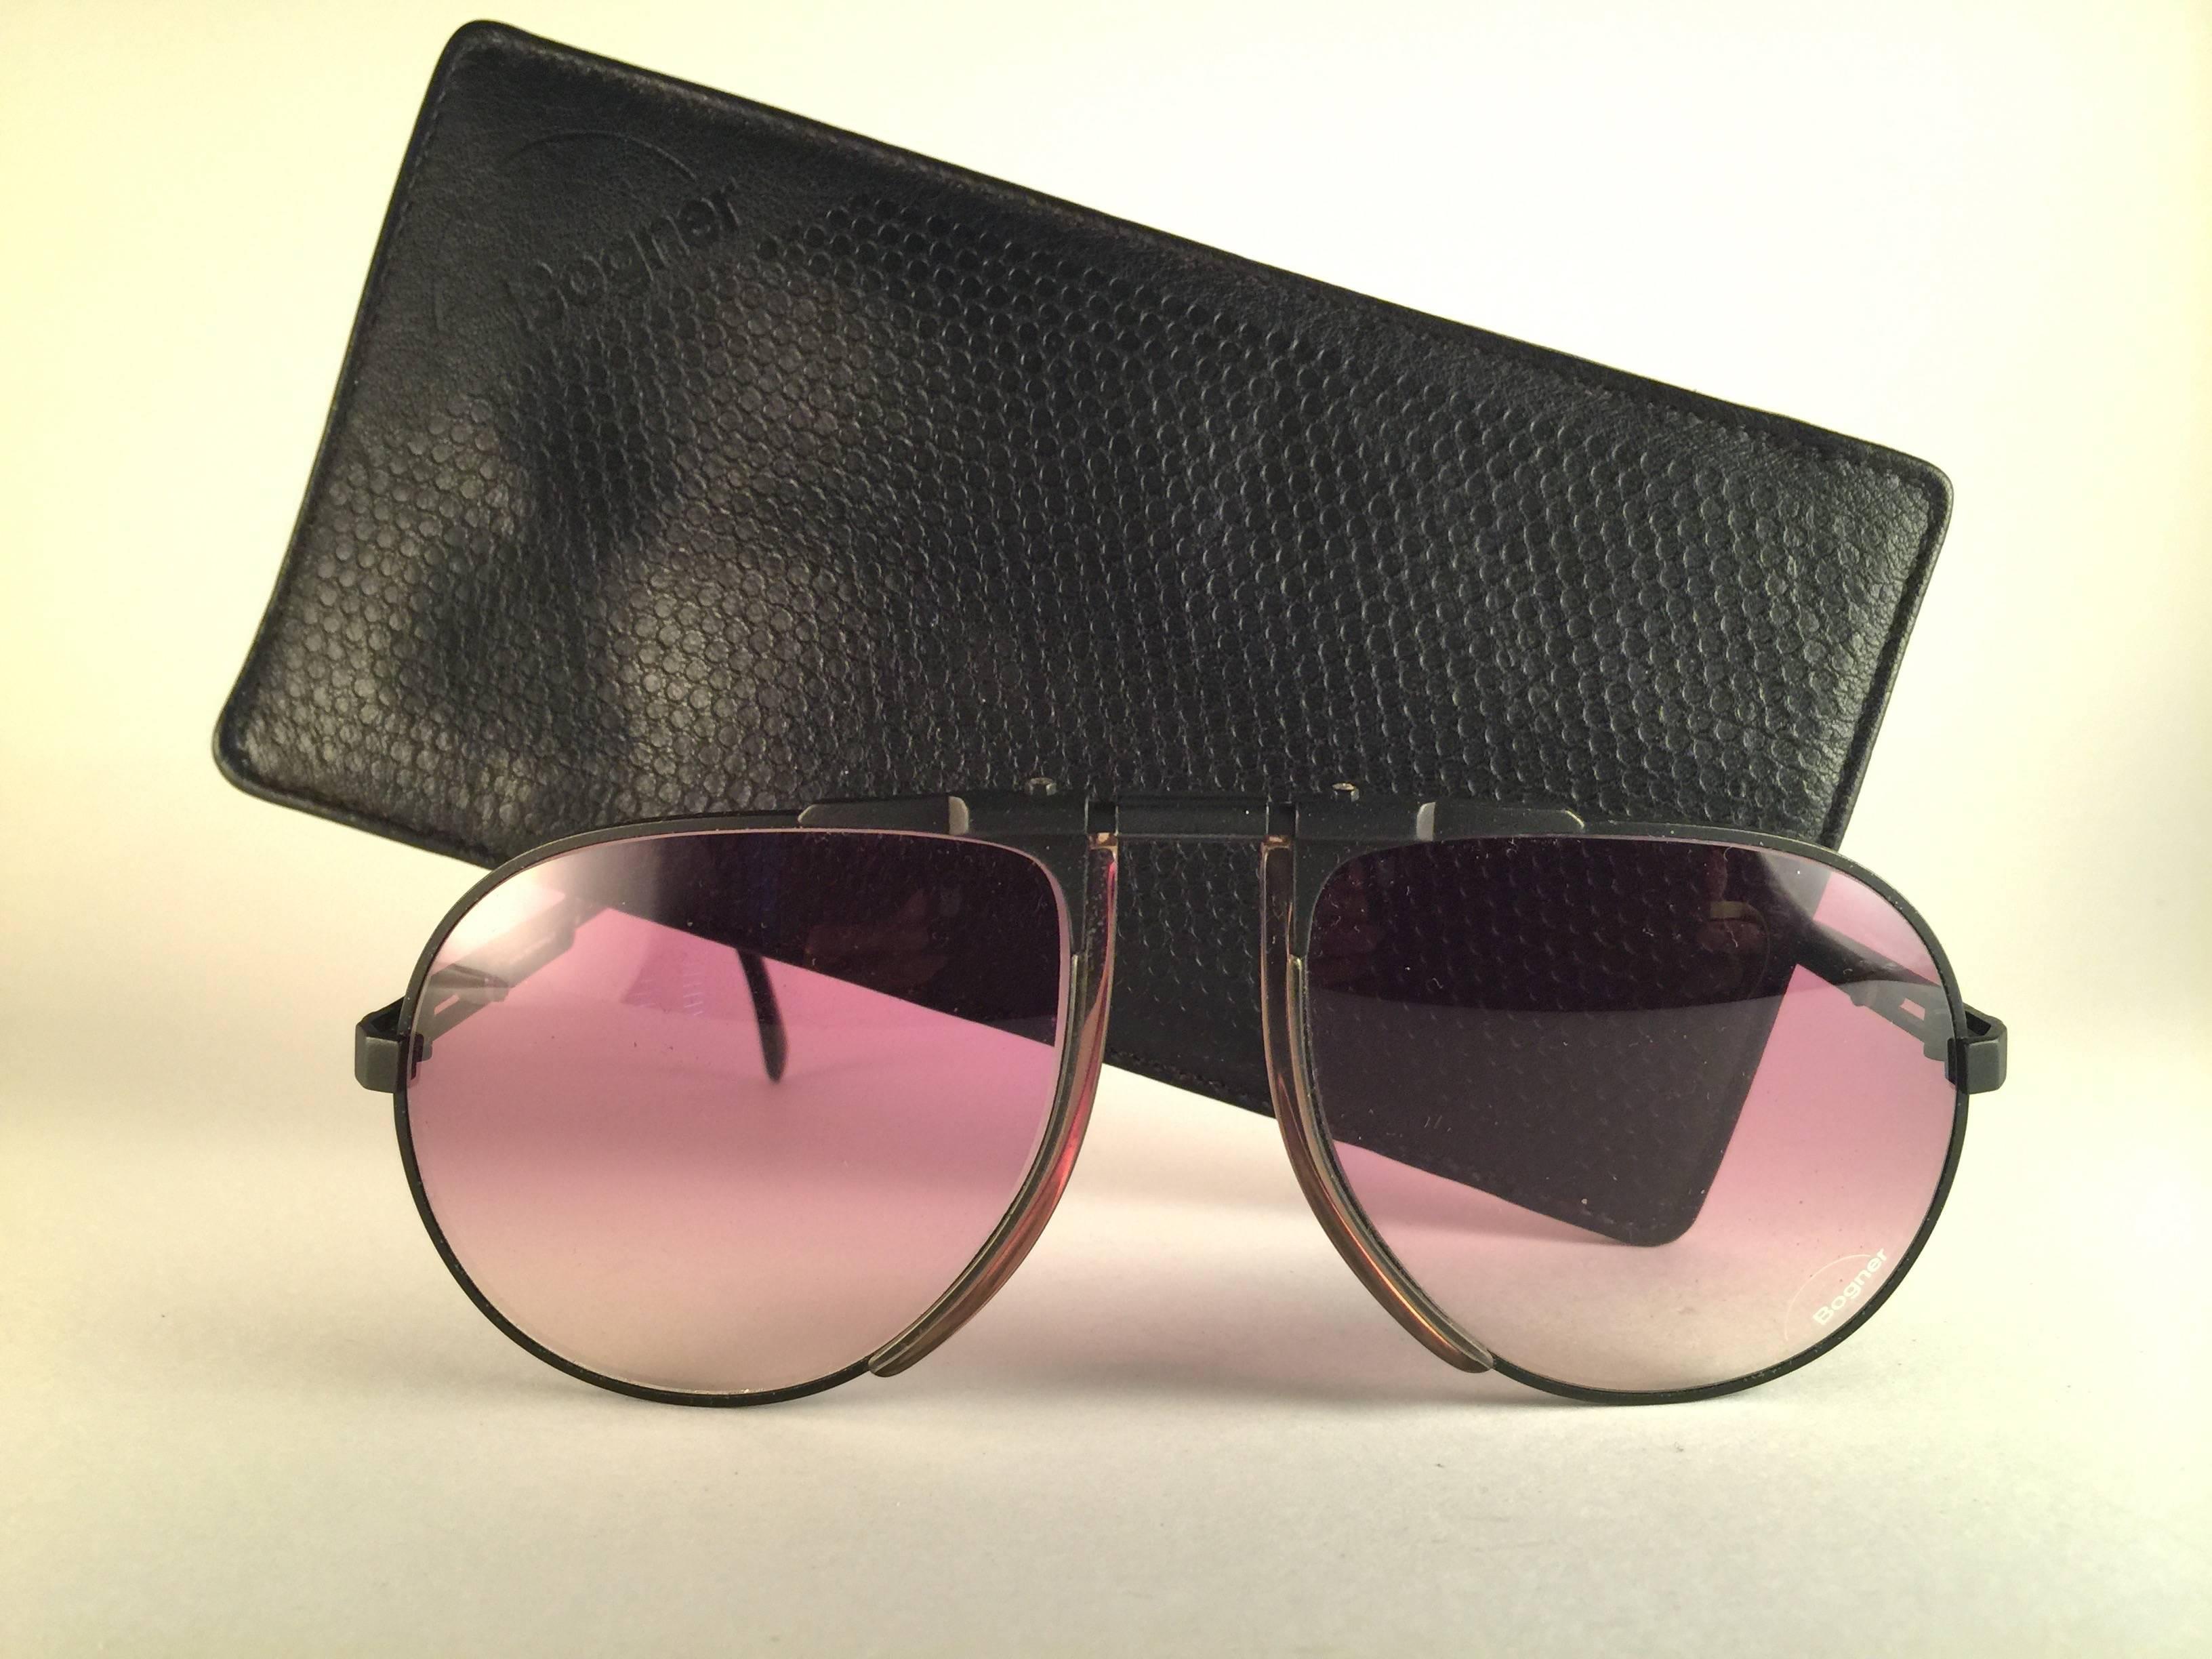 Collector's item.  
New vintage Bogner by Eschenbach sunglasses 7001 in matte black with rose gradient lenses. The model is from the same series used by the late Roger Moore in 007's 